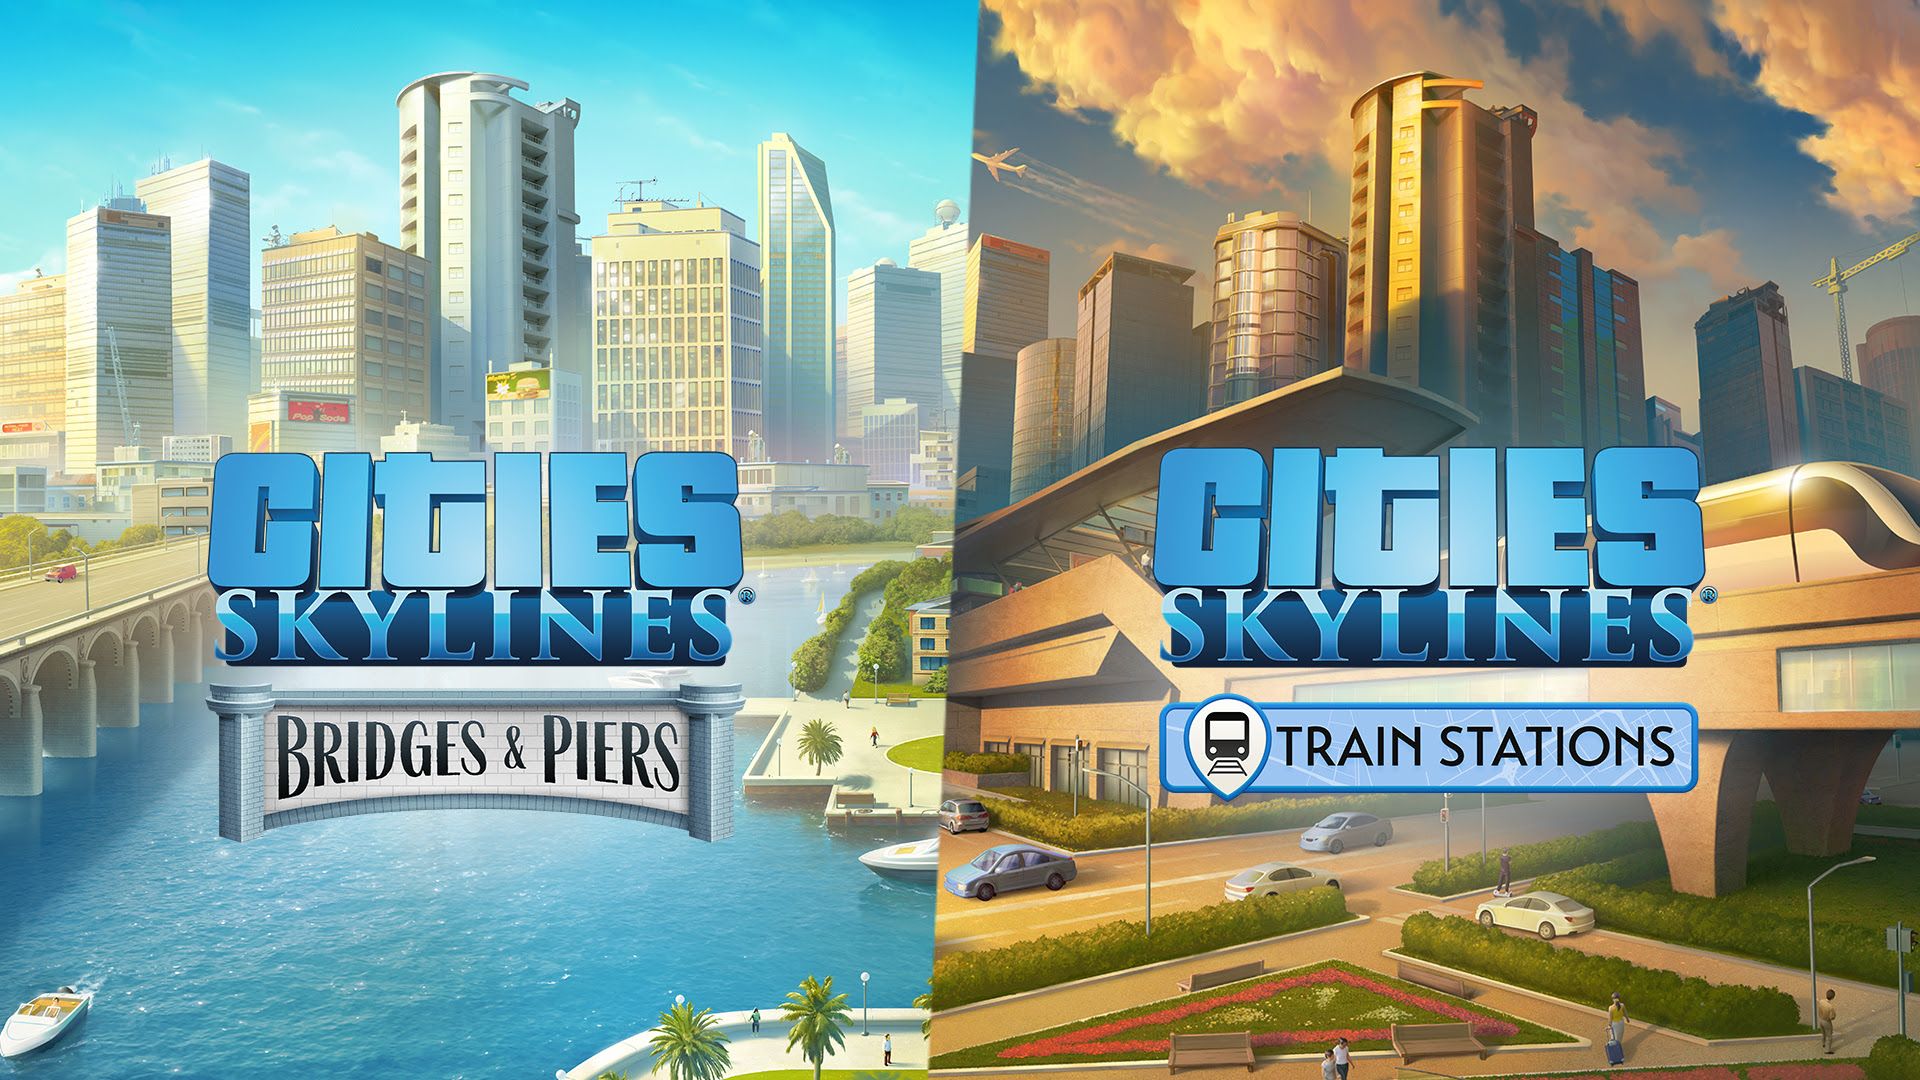 Image for Cities: Skylines has new bridges, train stations, and radio options available today